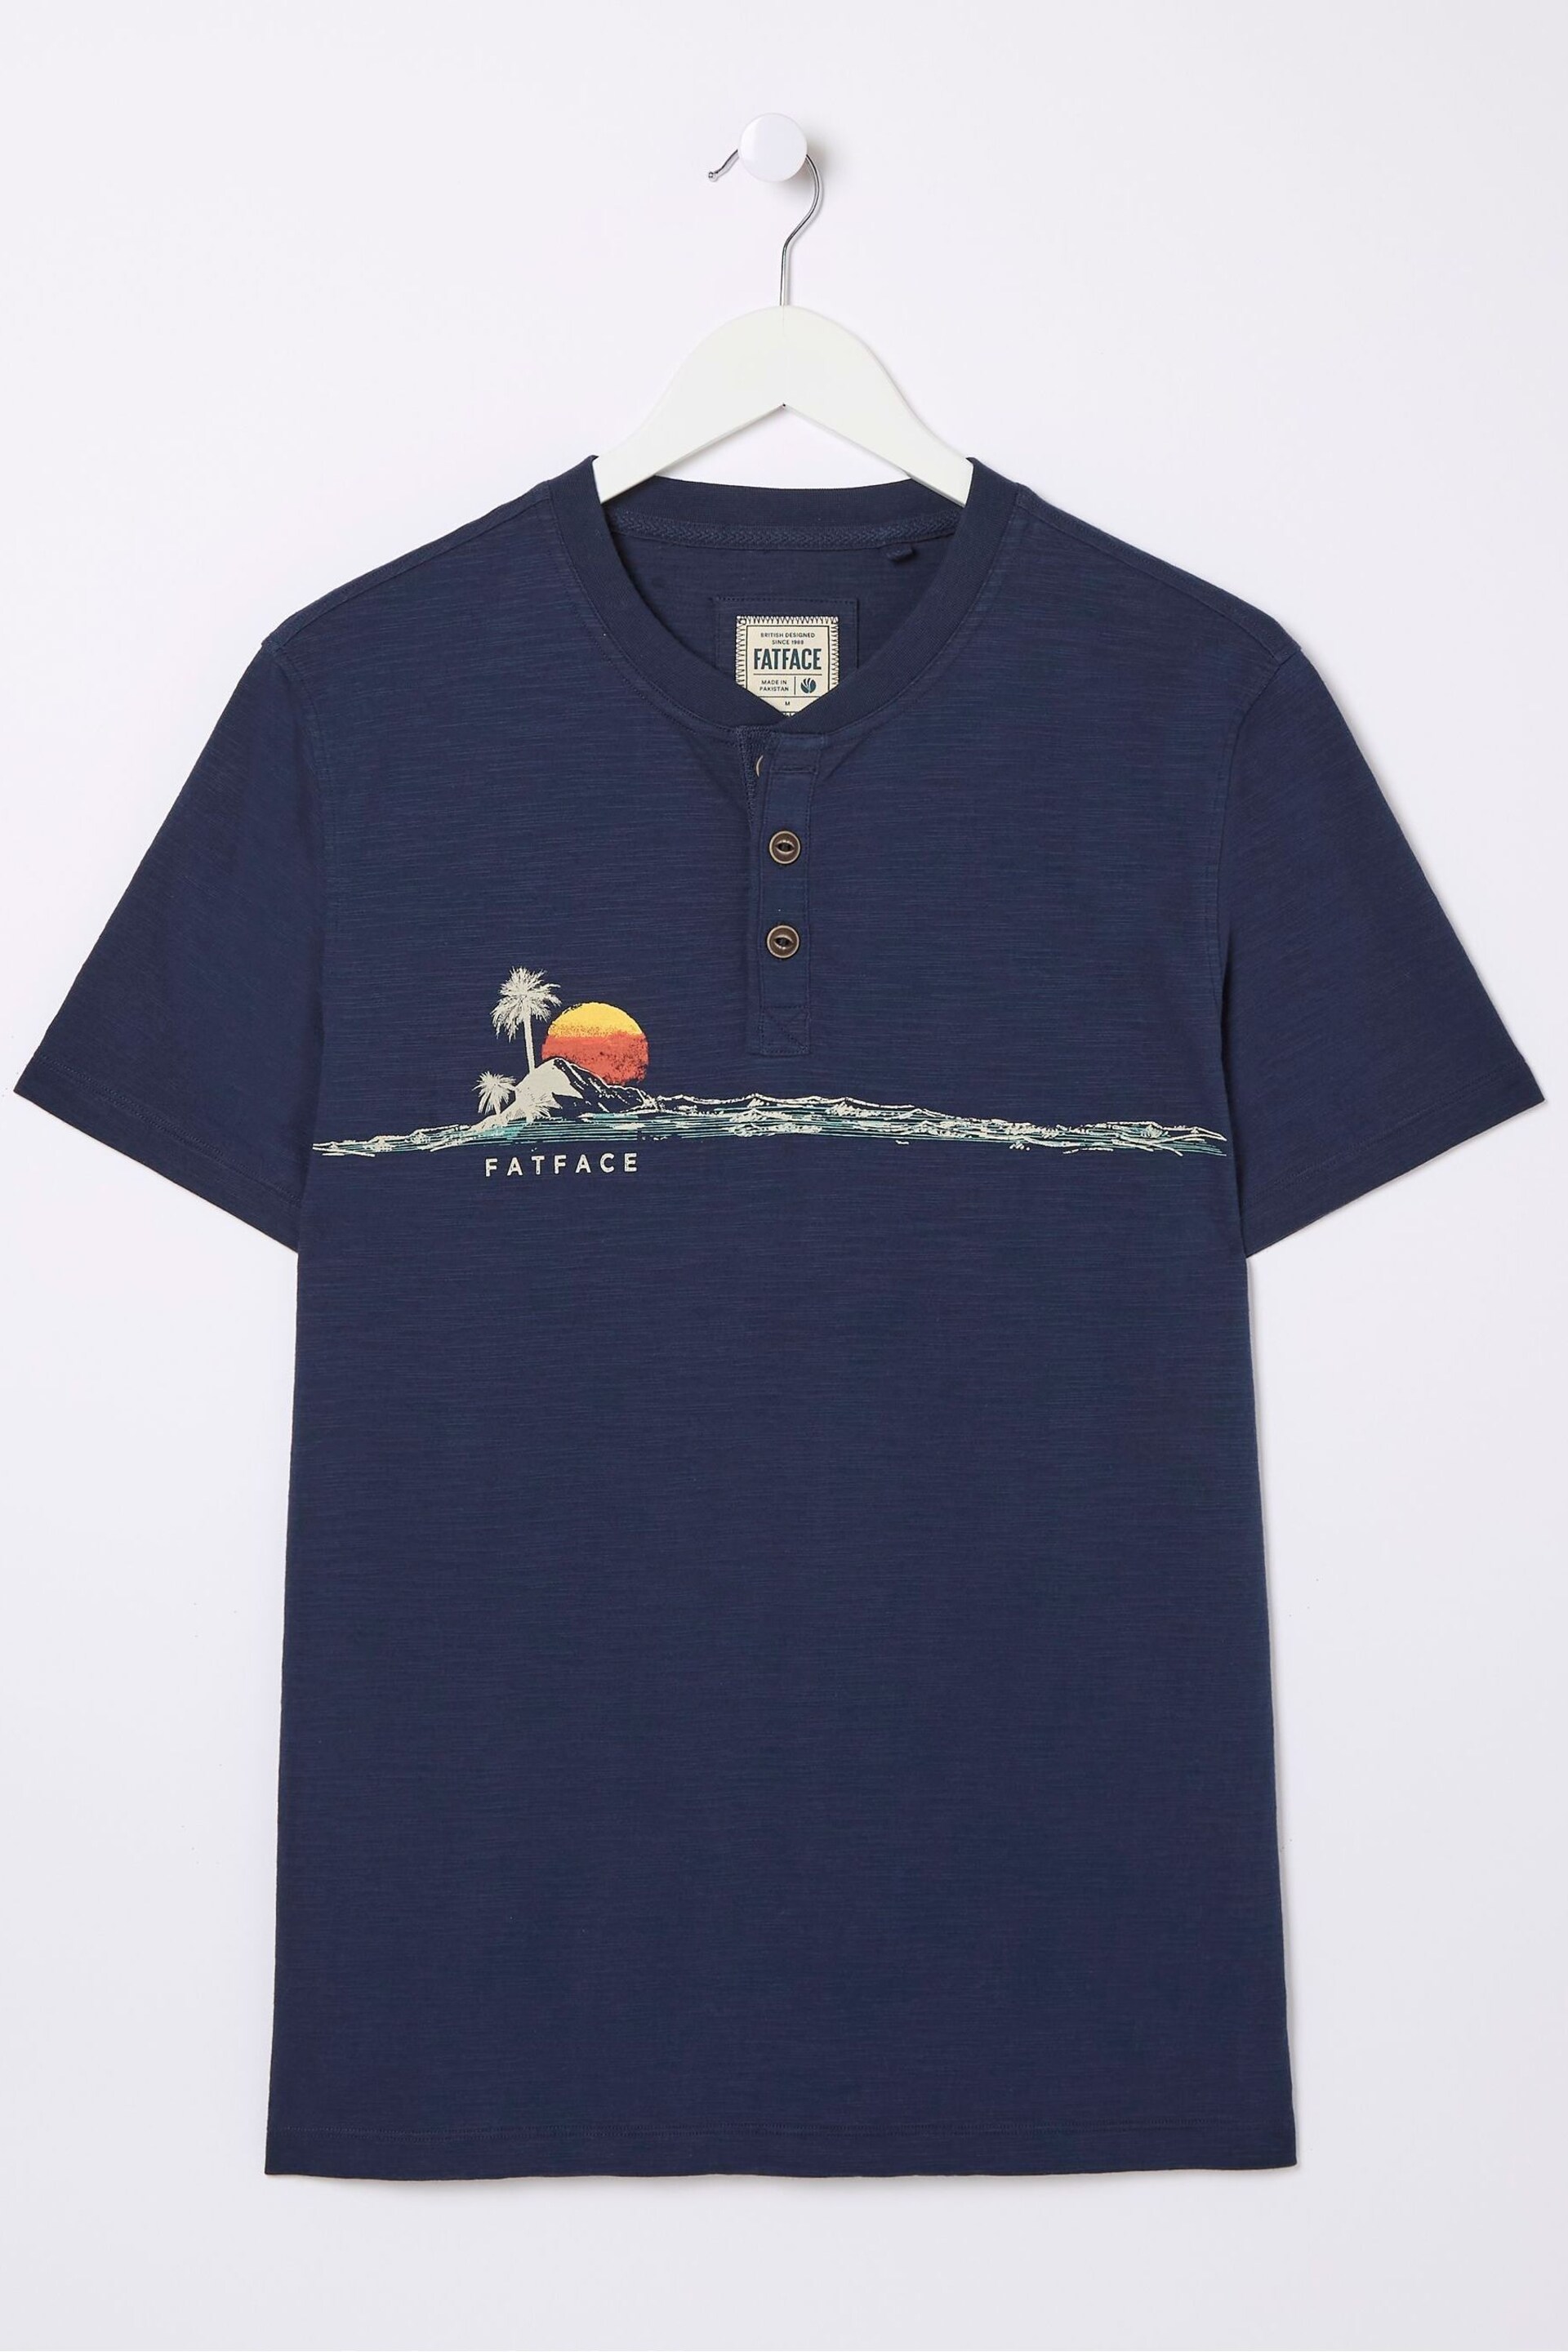 FatFace Blue Chest Stripe Oasis Henley T-Shirt - Image 4 of 4